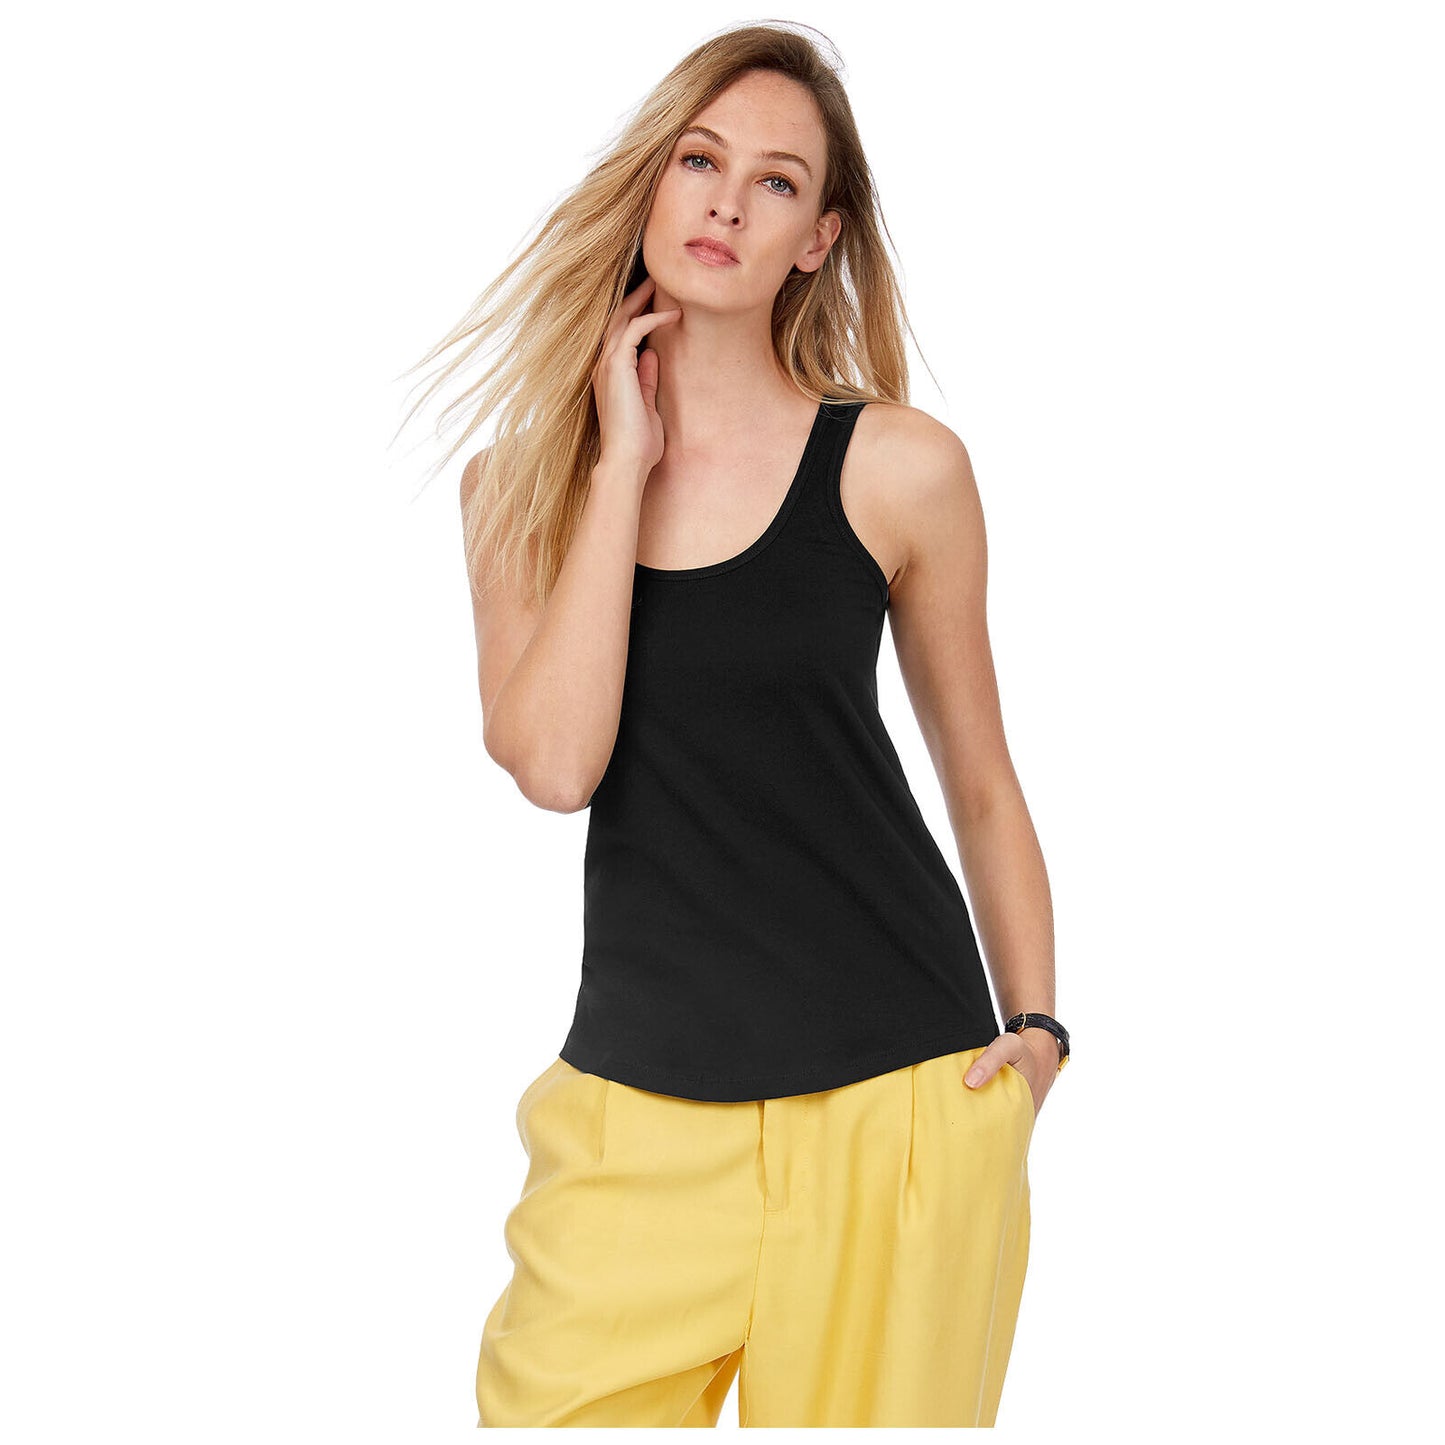 PACK OF 2 NEW WOMEN LADIES CASUAL PLAIN SUMMER STRETCHY RIBBED TOP T SHIRT VEST